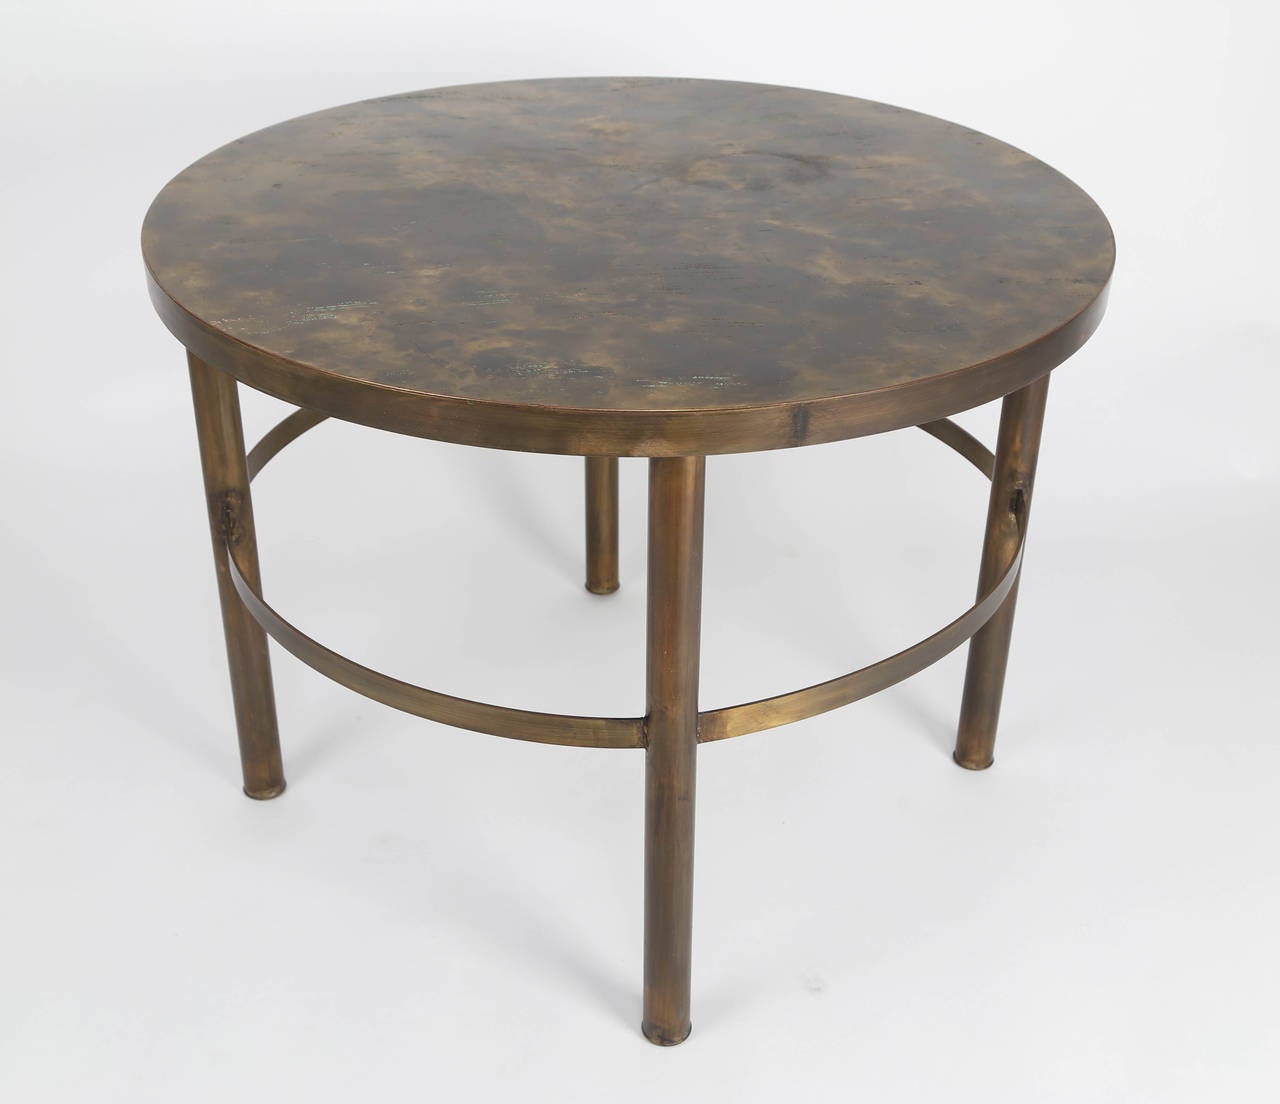 Gorgeous 1960s circular end or lamp table in patinated and etched bronze with tubular legs and banded stretchers, by father and son designers Philip and Kelvin Laverne. Etched signature on top and paper label on underside. 

See this item in our